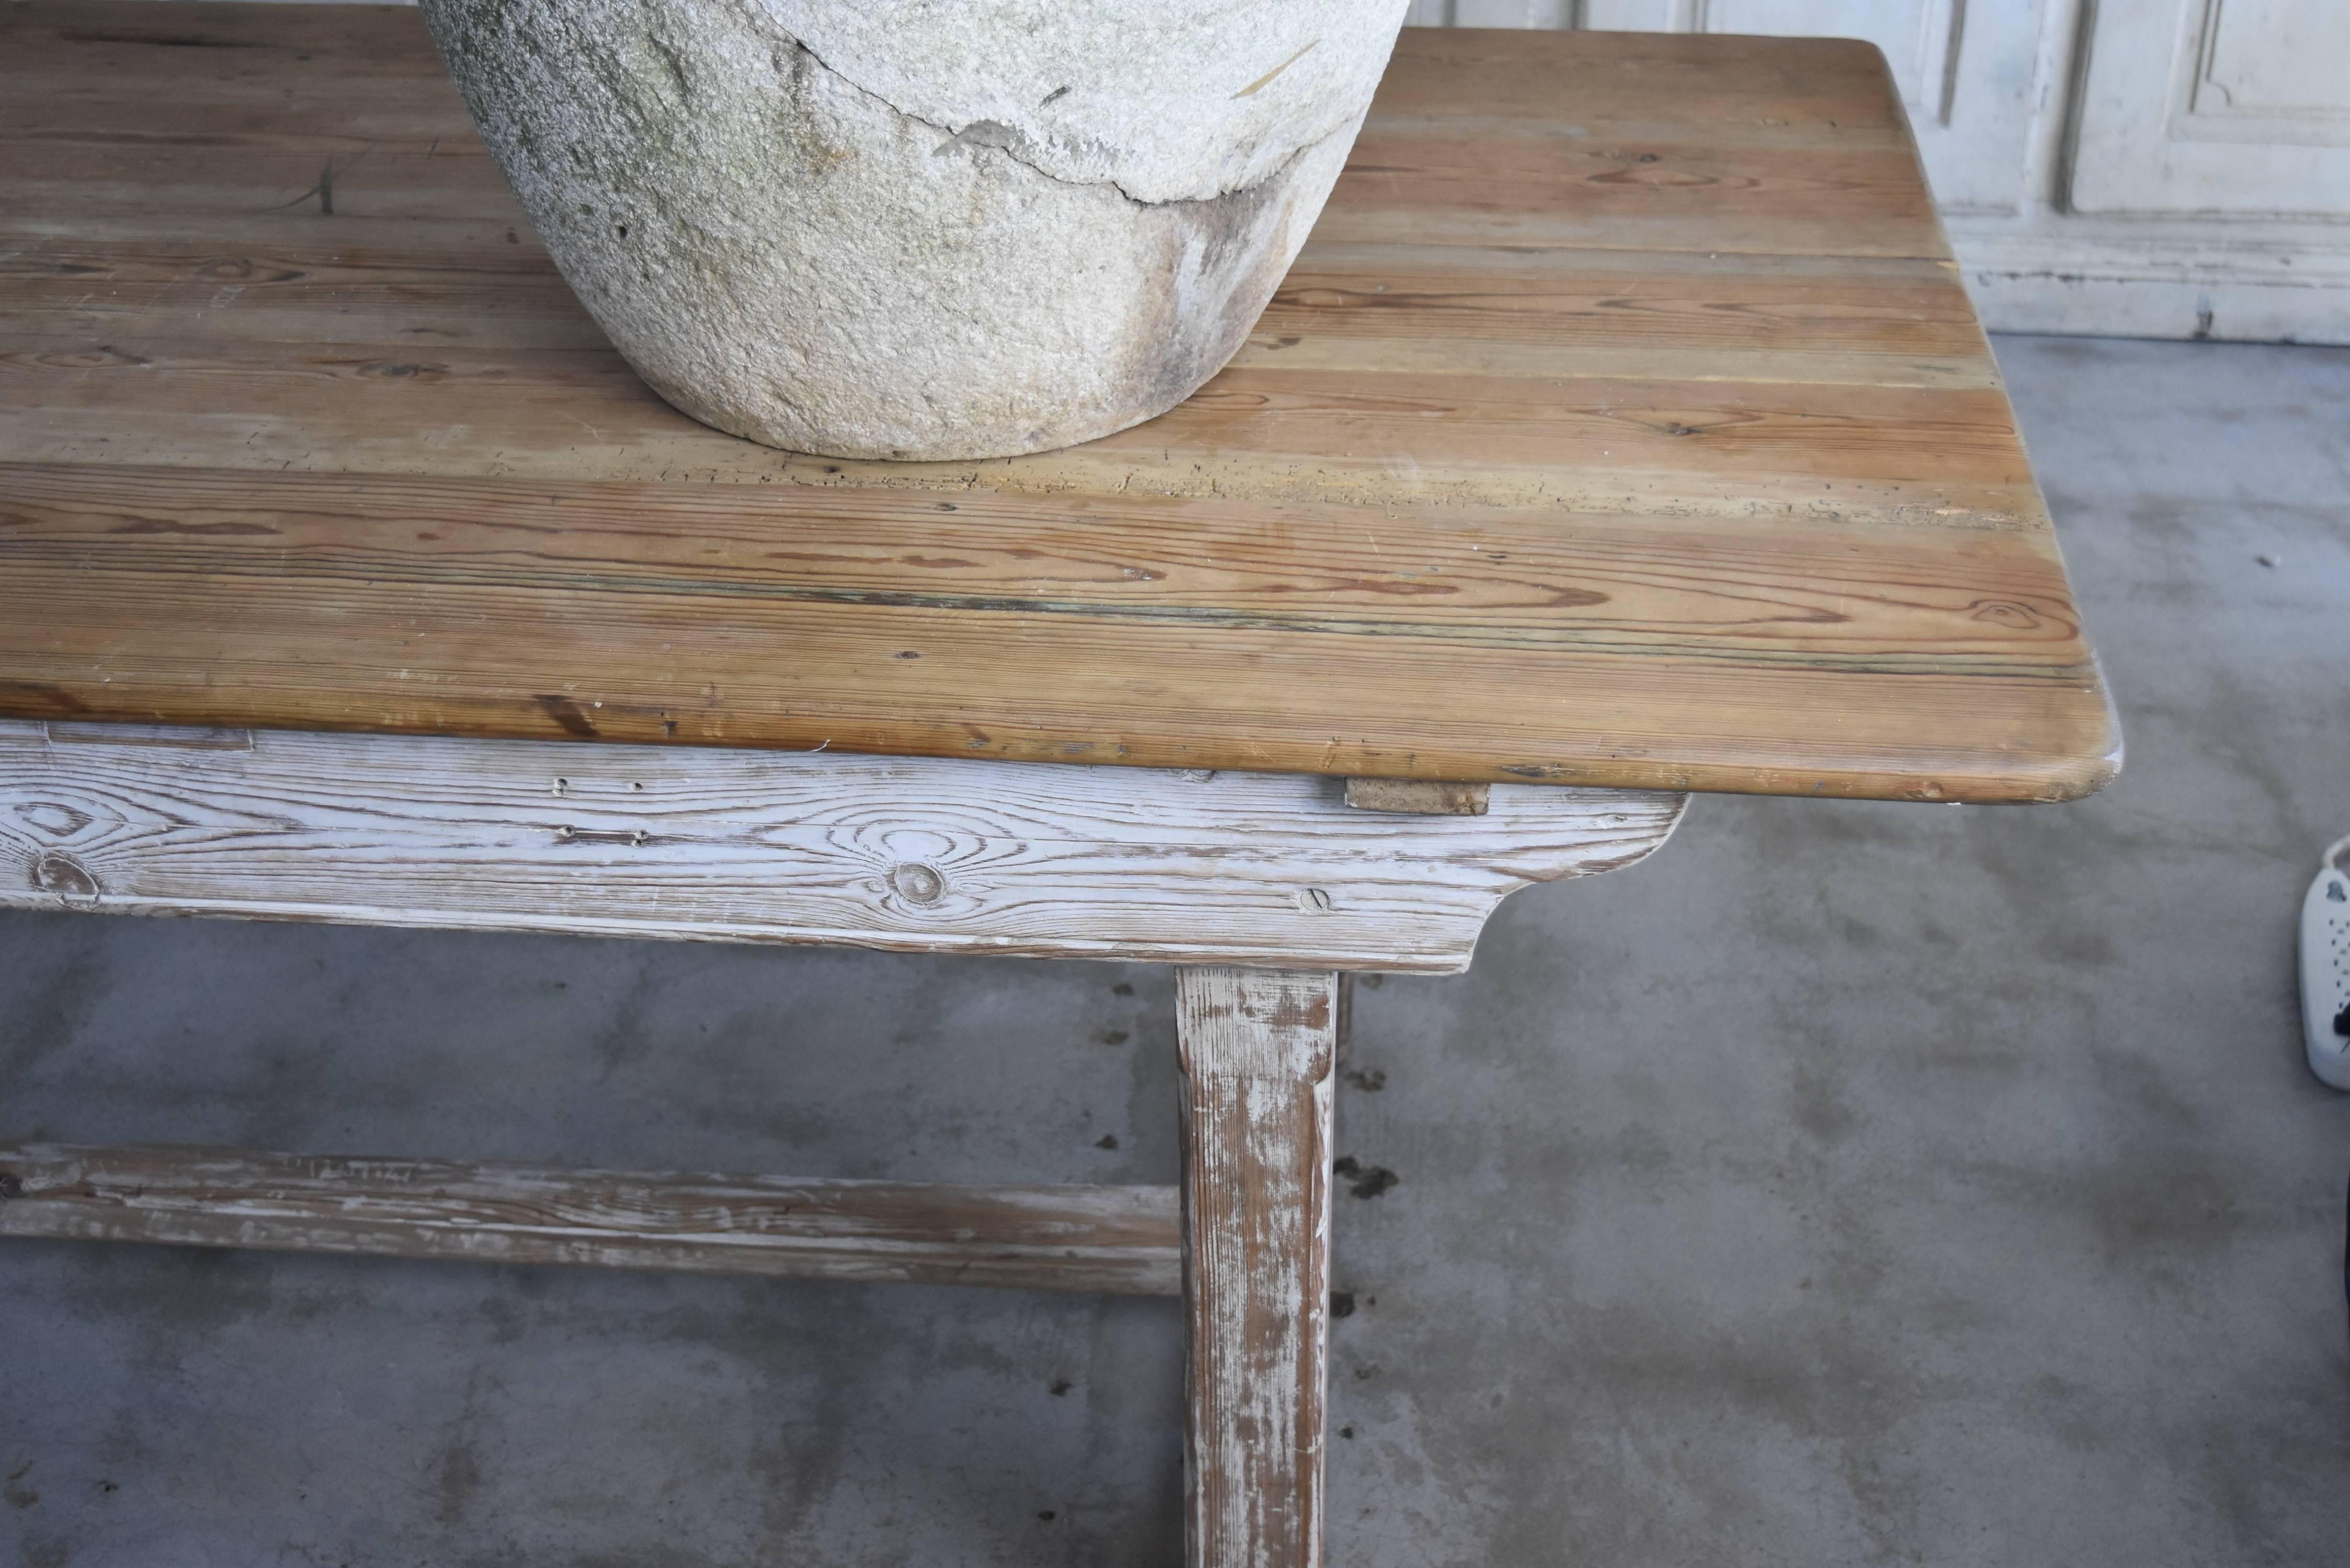 Hand-Painted 19th Century French Farm Table in Pine with Creamy White Painted Base